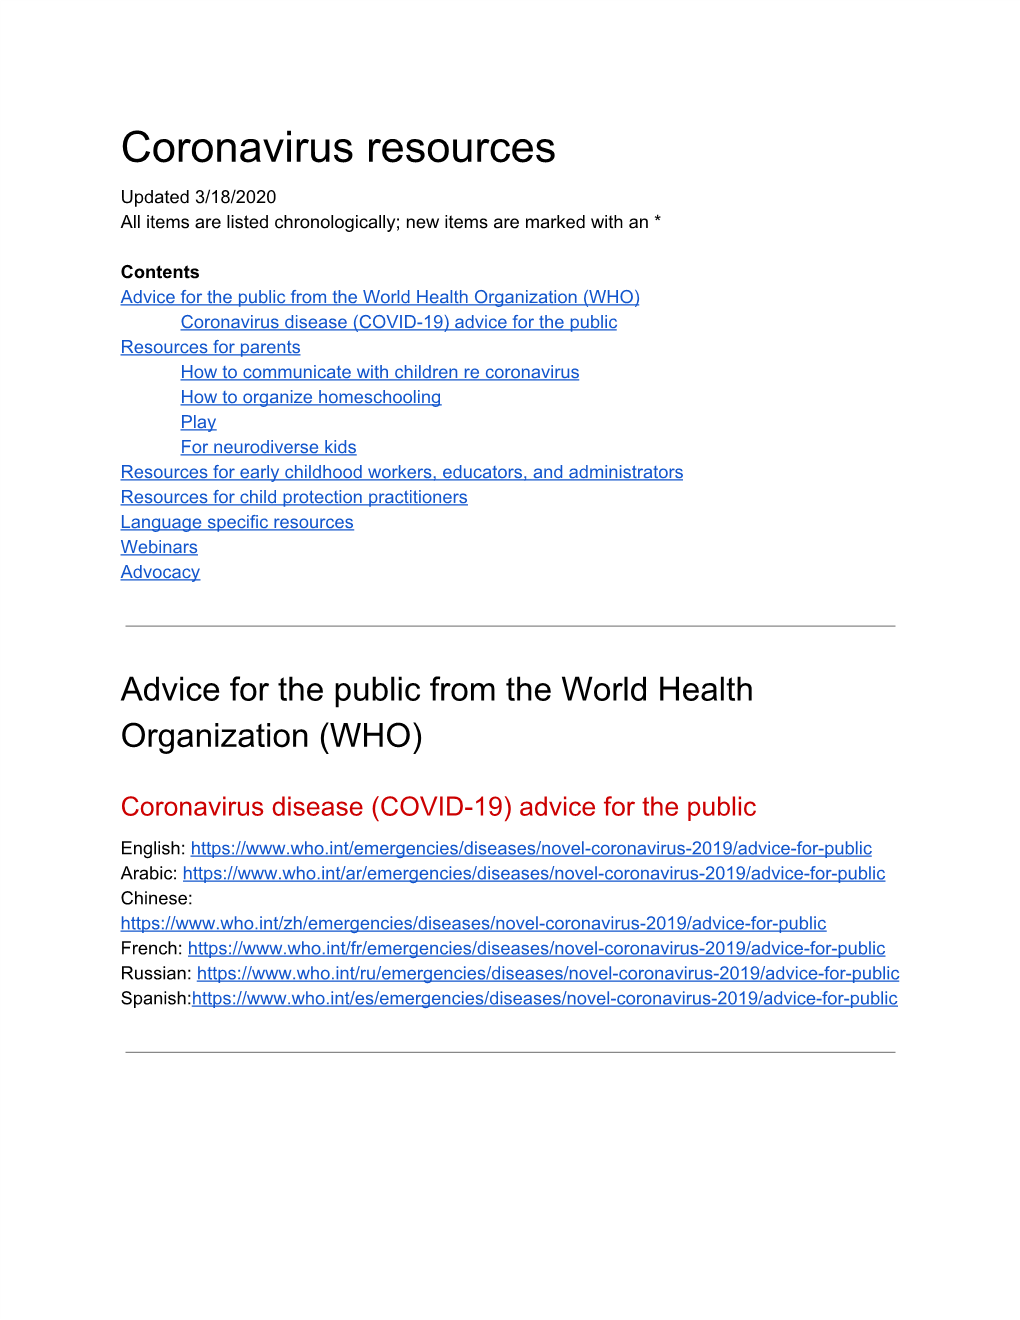 Coronavirus Resources Updated 3/18/2020 All Items Are Listed Chronologically; New Items Are Marked with an *